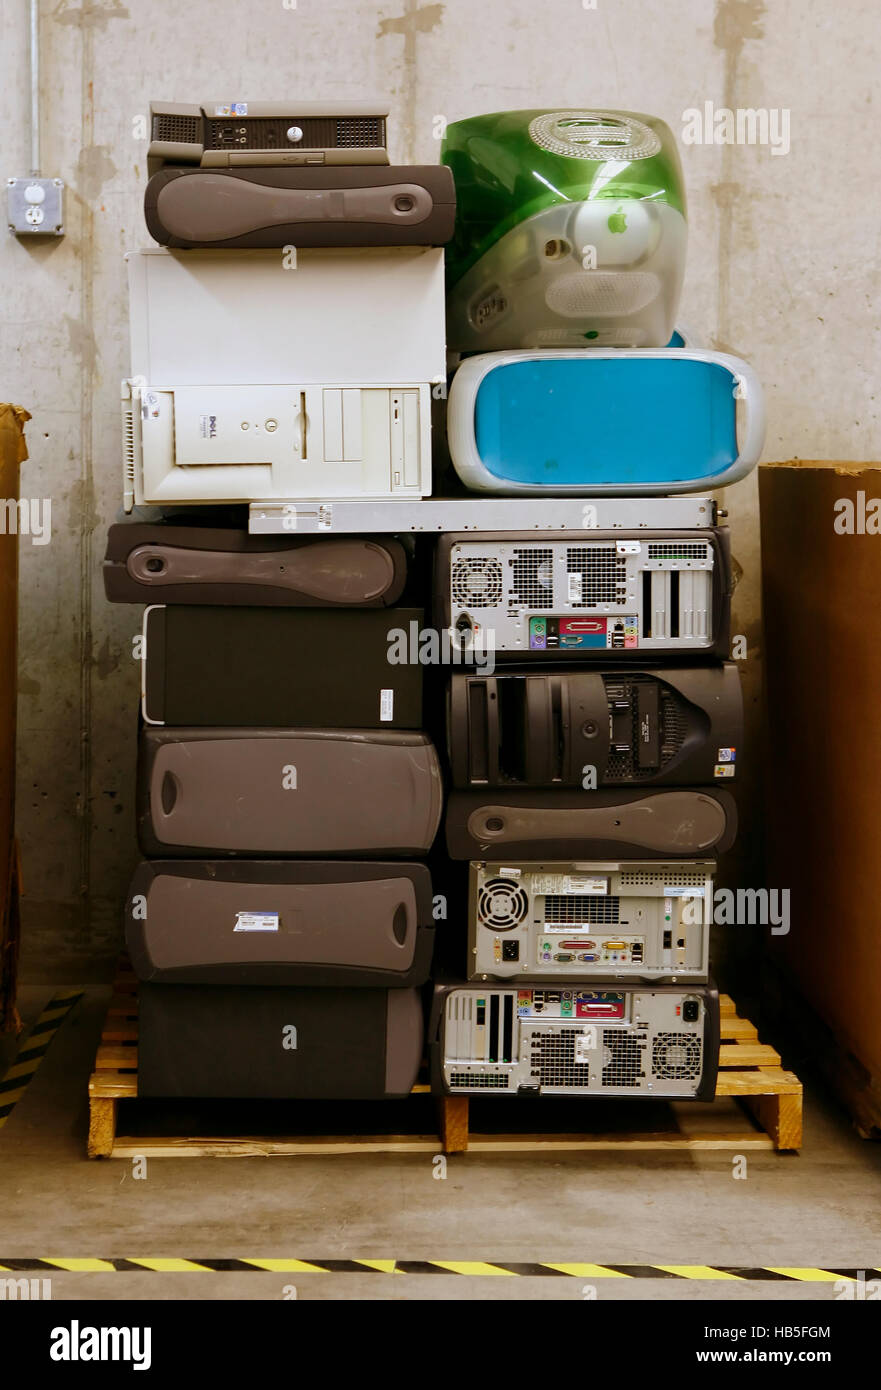 Donated PC and Apple hard drives sit at a Goodwill store in Austin, Texas waiting to be recycled. Stock Photo